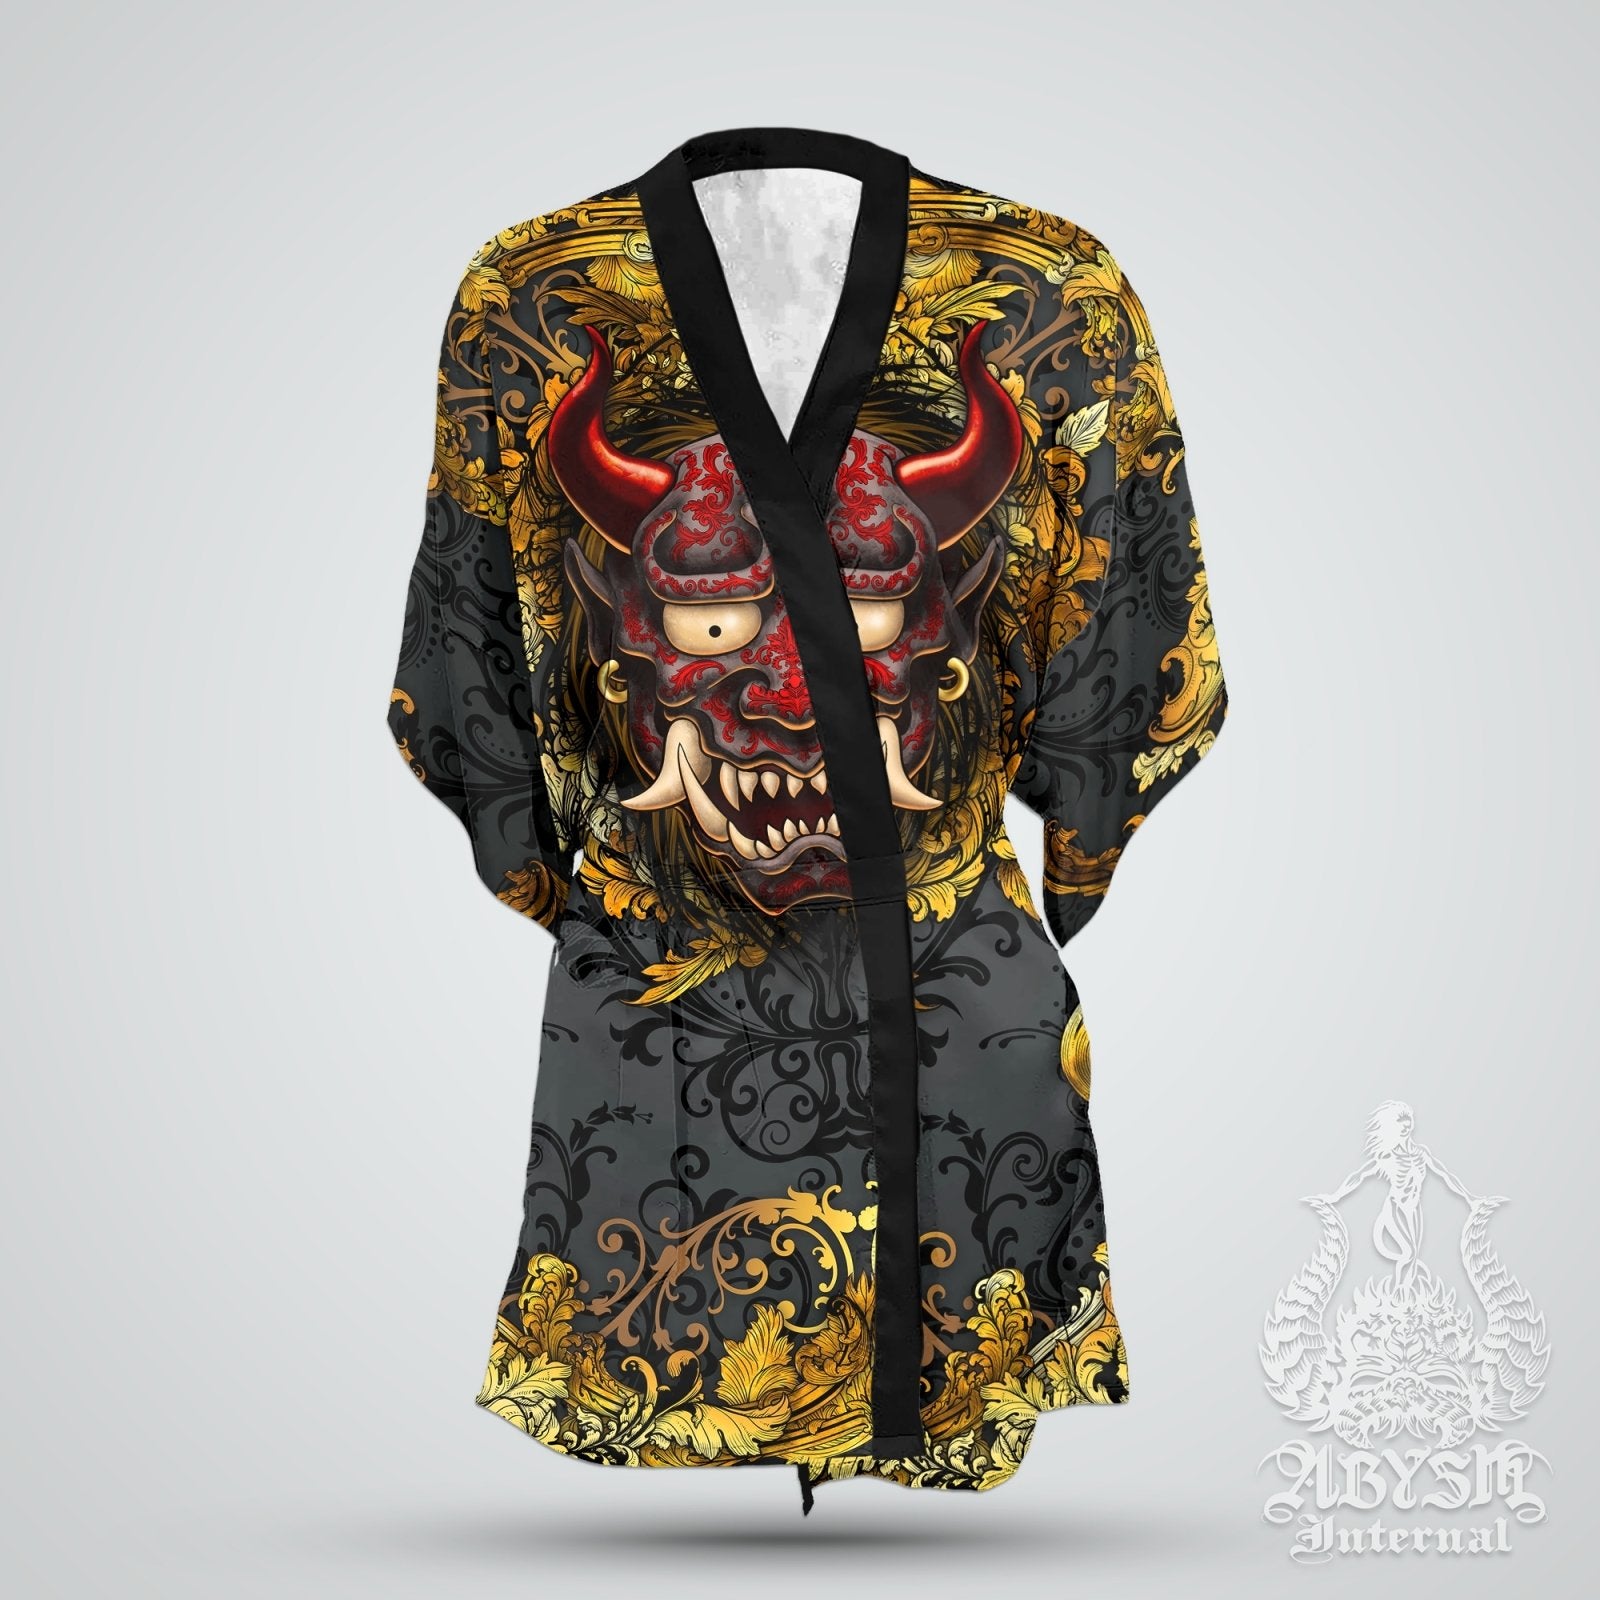 Demon Cover Up, Beach Outfit, Oni Party Kimono, Japanese Summer Festival Robe, Indie and Alternative Clothing, Unisex - Gold Black - Abysm Internal